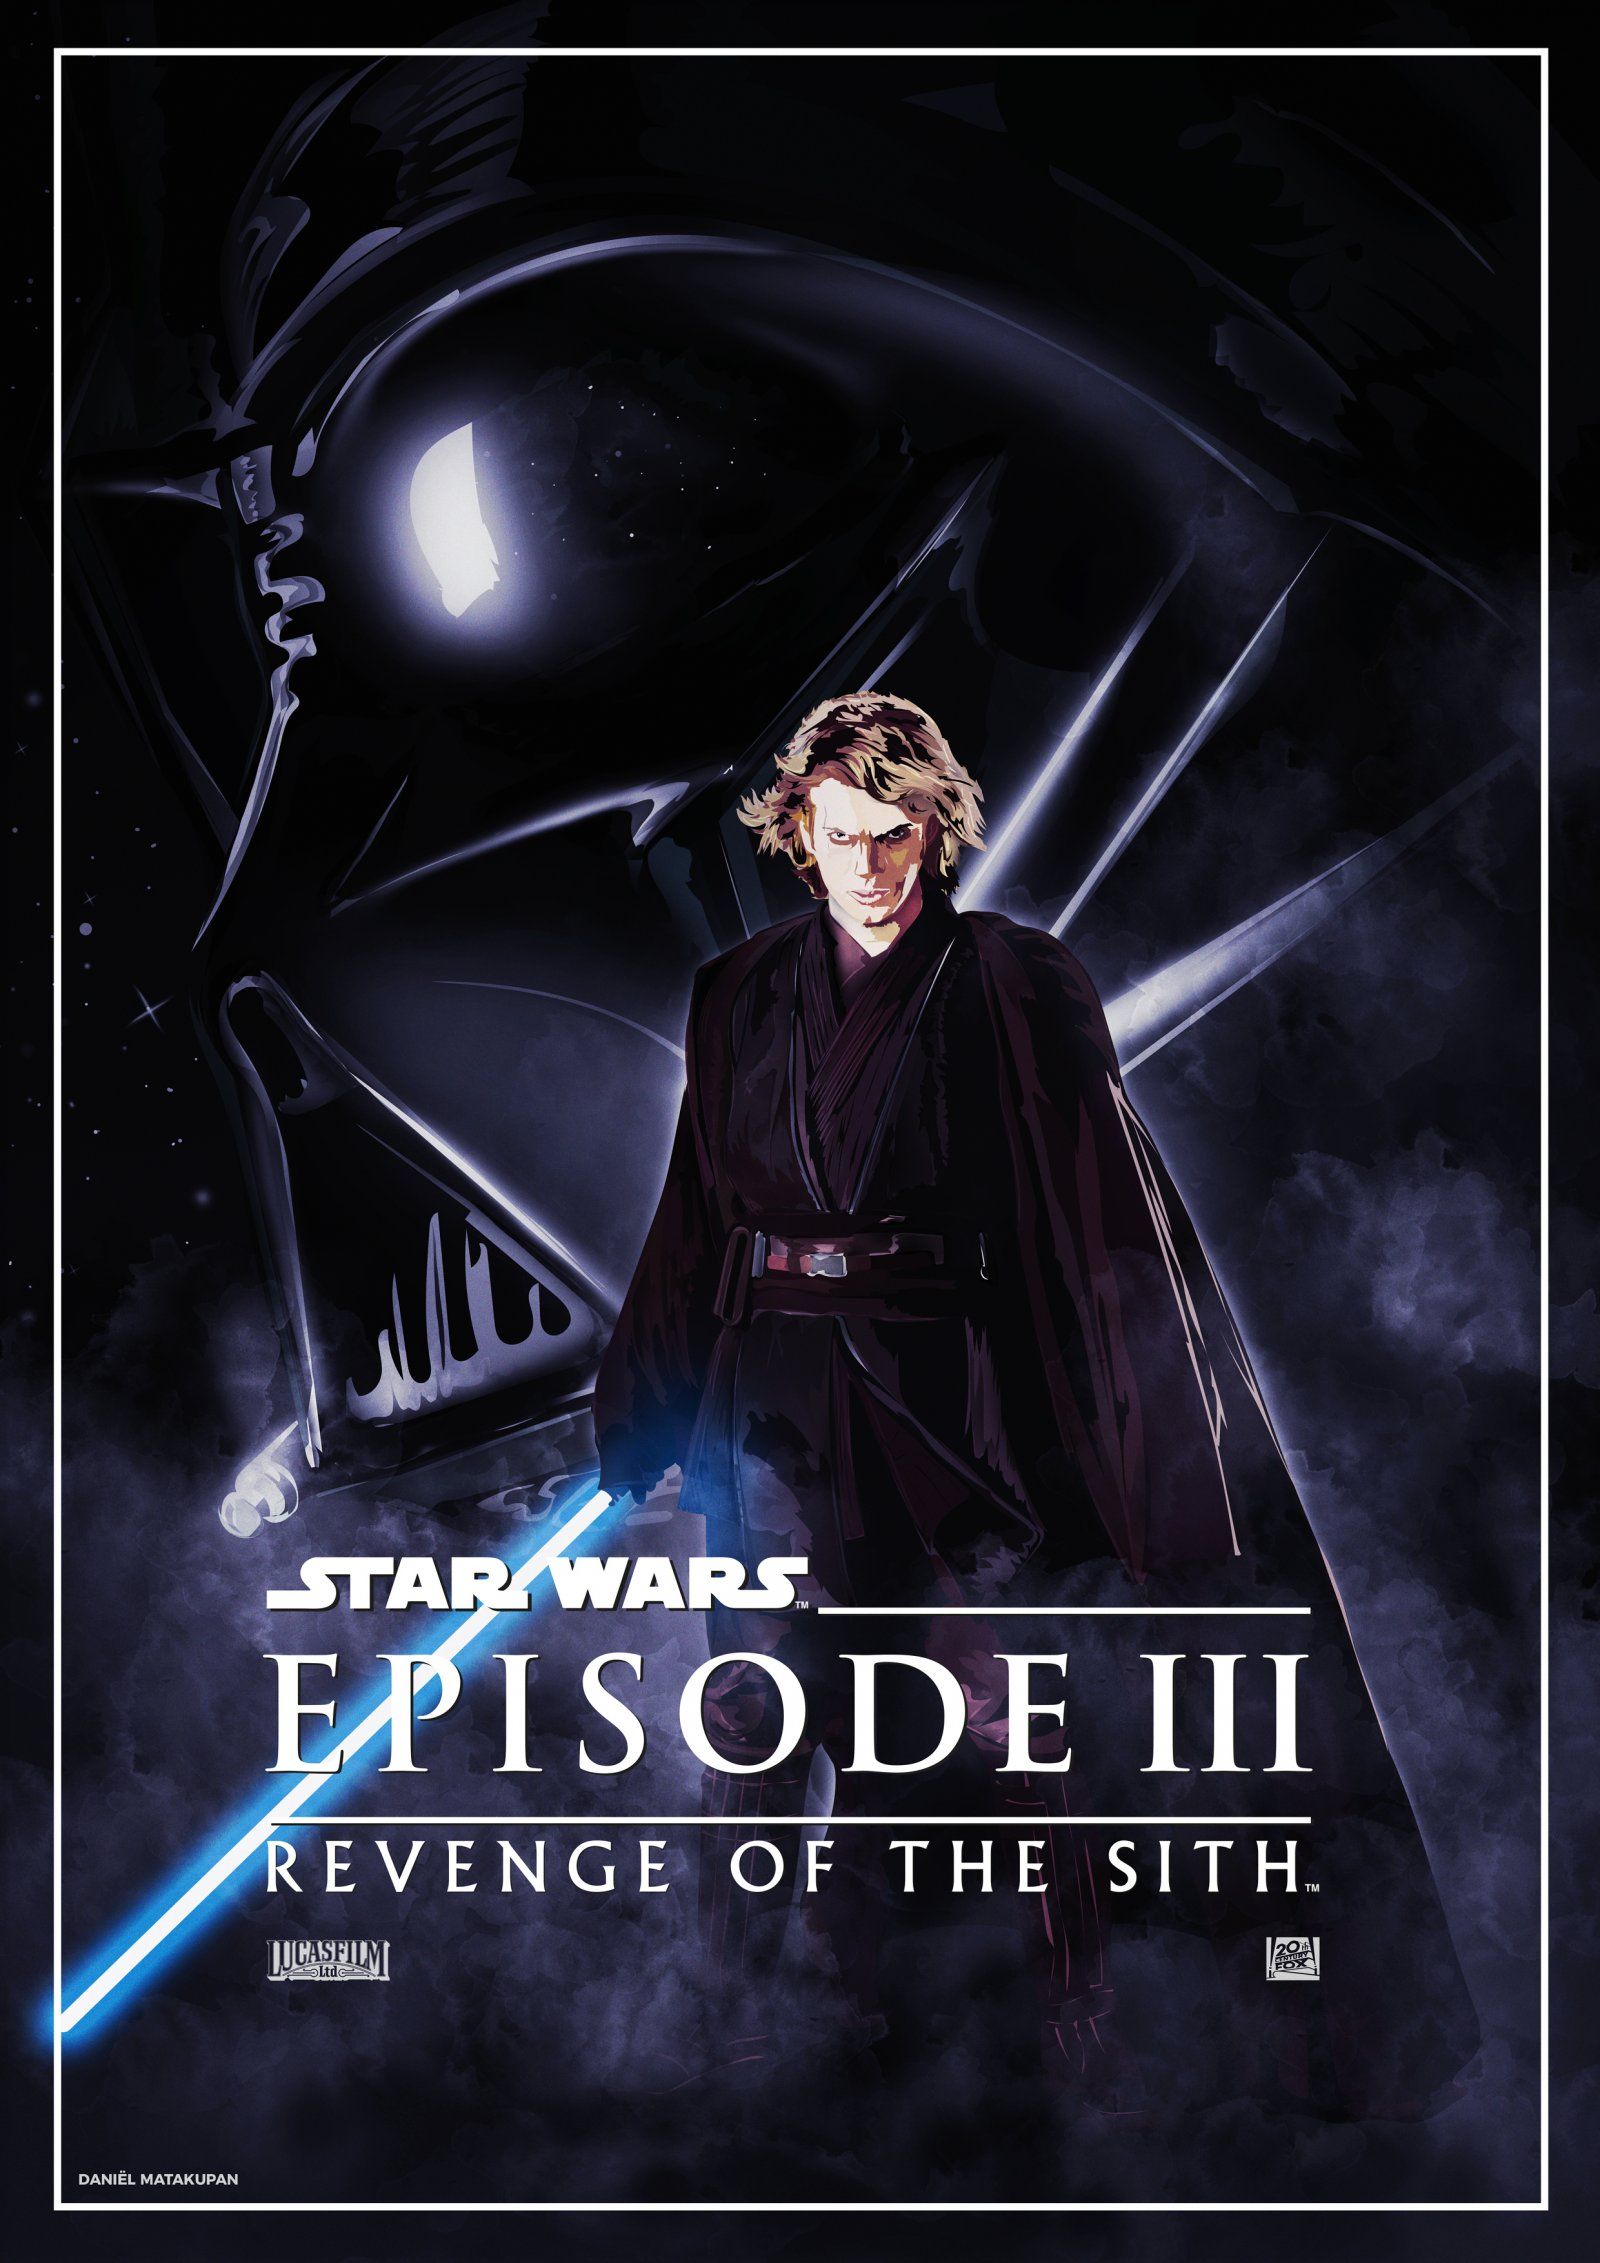 Star Wars: Episode III of the Sith(2005) HD Wallpaper From Gallsource.com. Star wars film, Star wars poster, Star wars